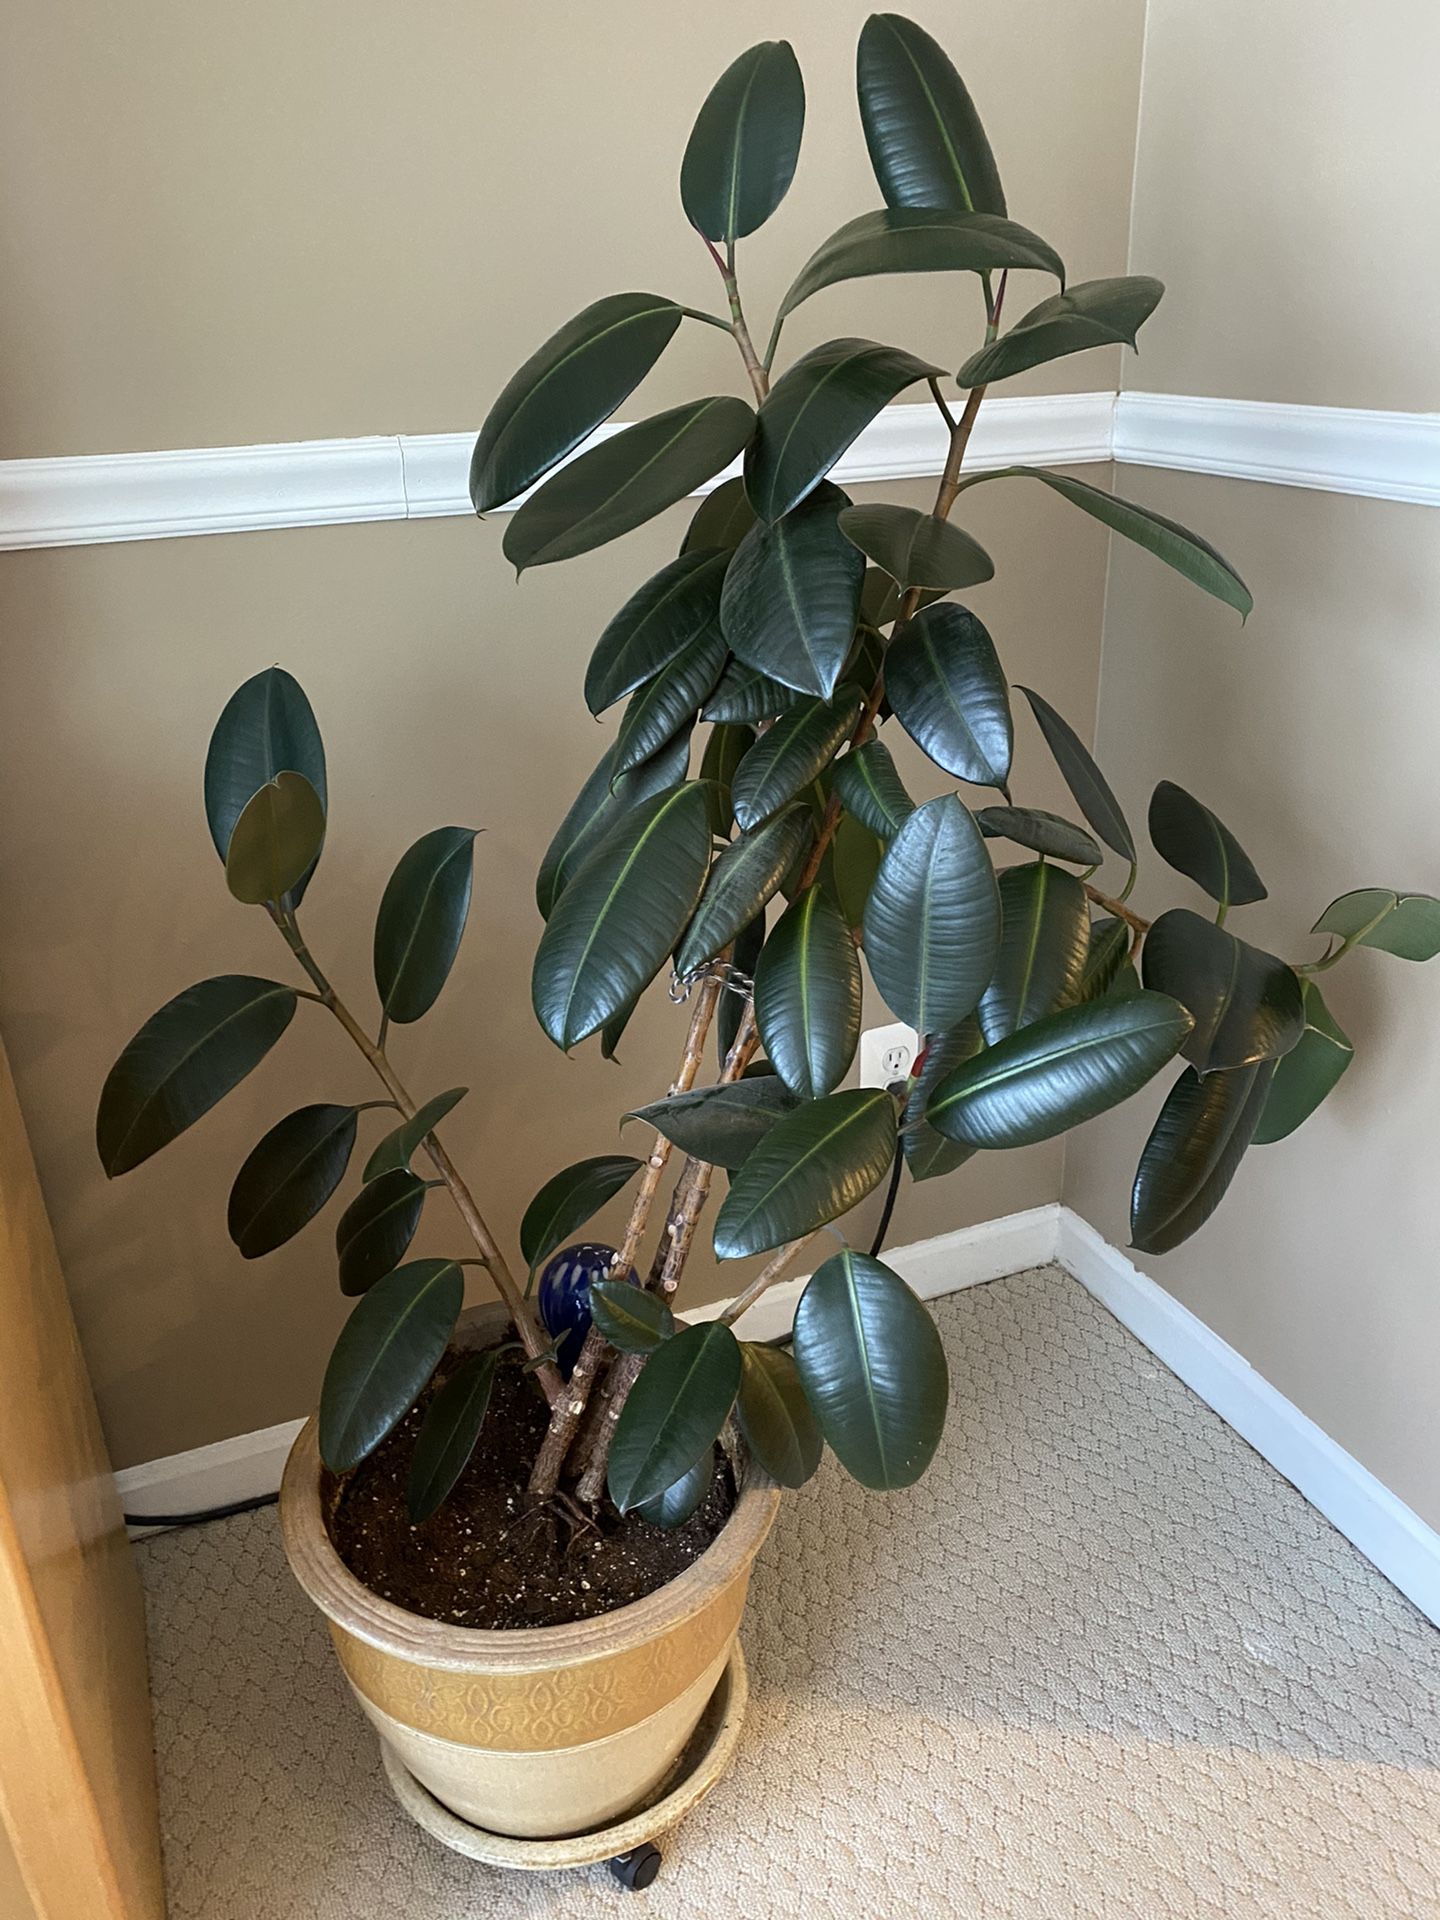 FREE rubber tree plant with pot on casters and watering globe